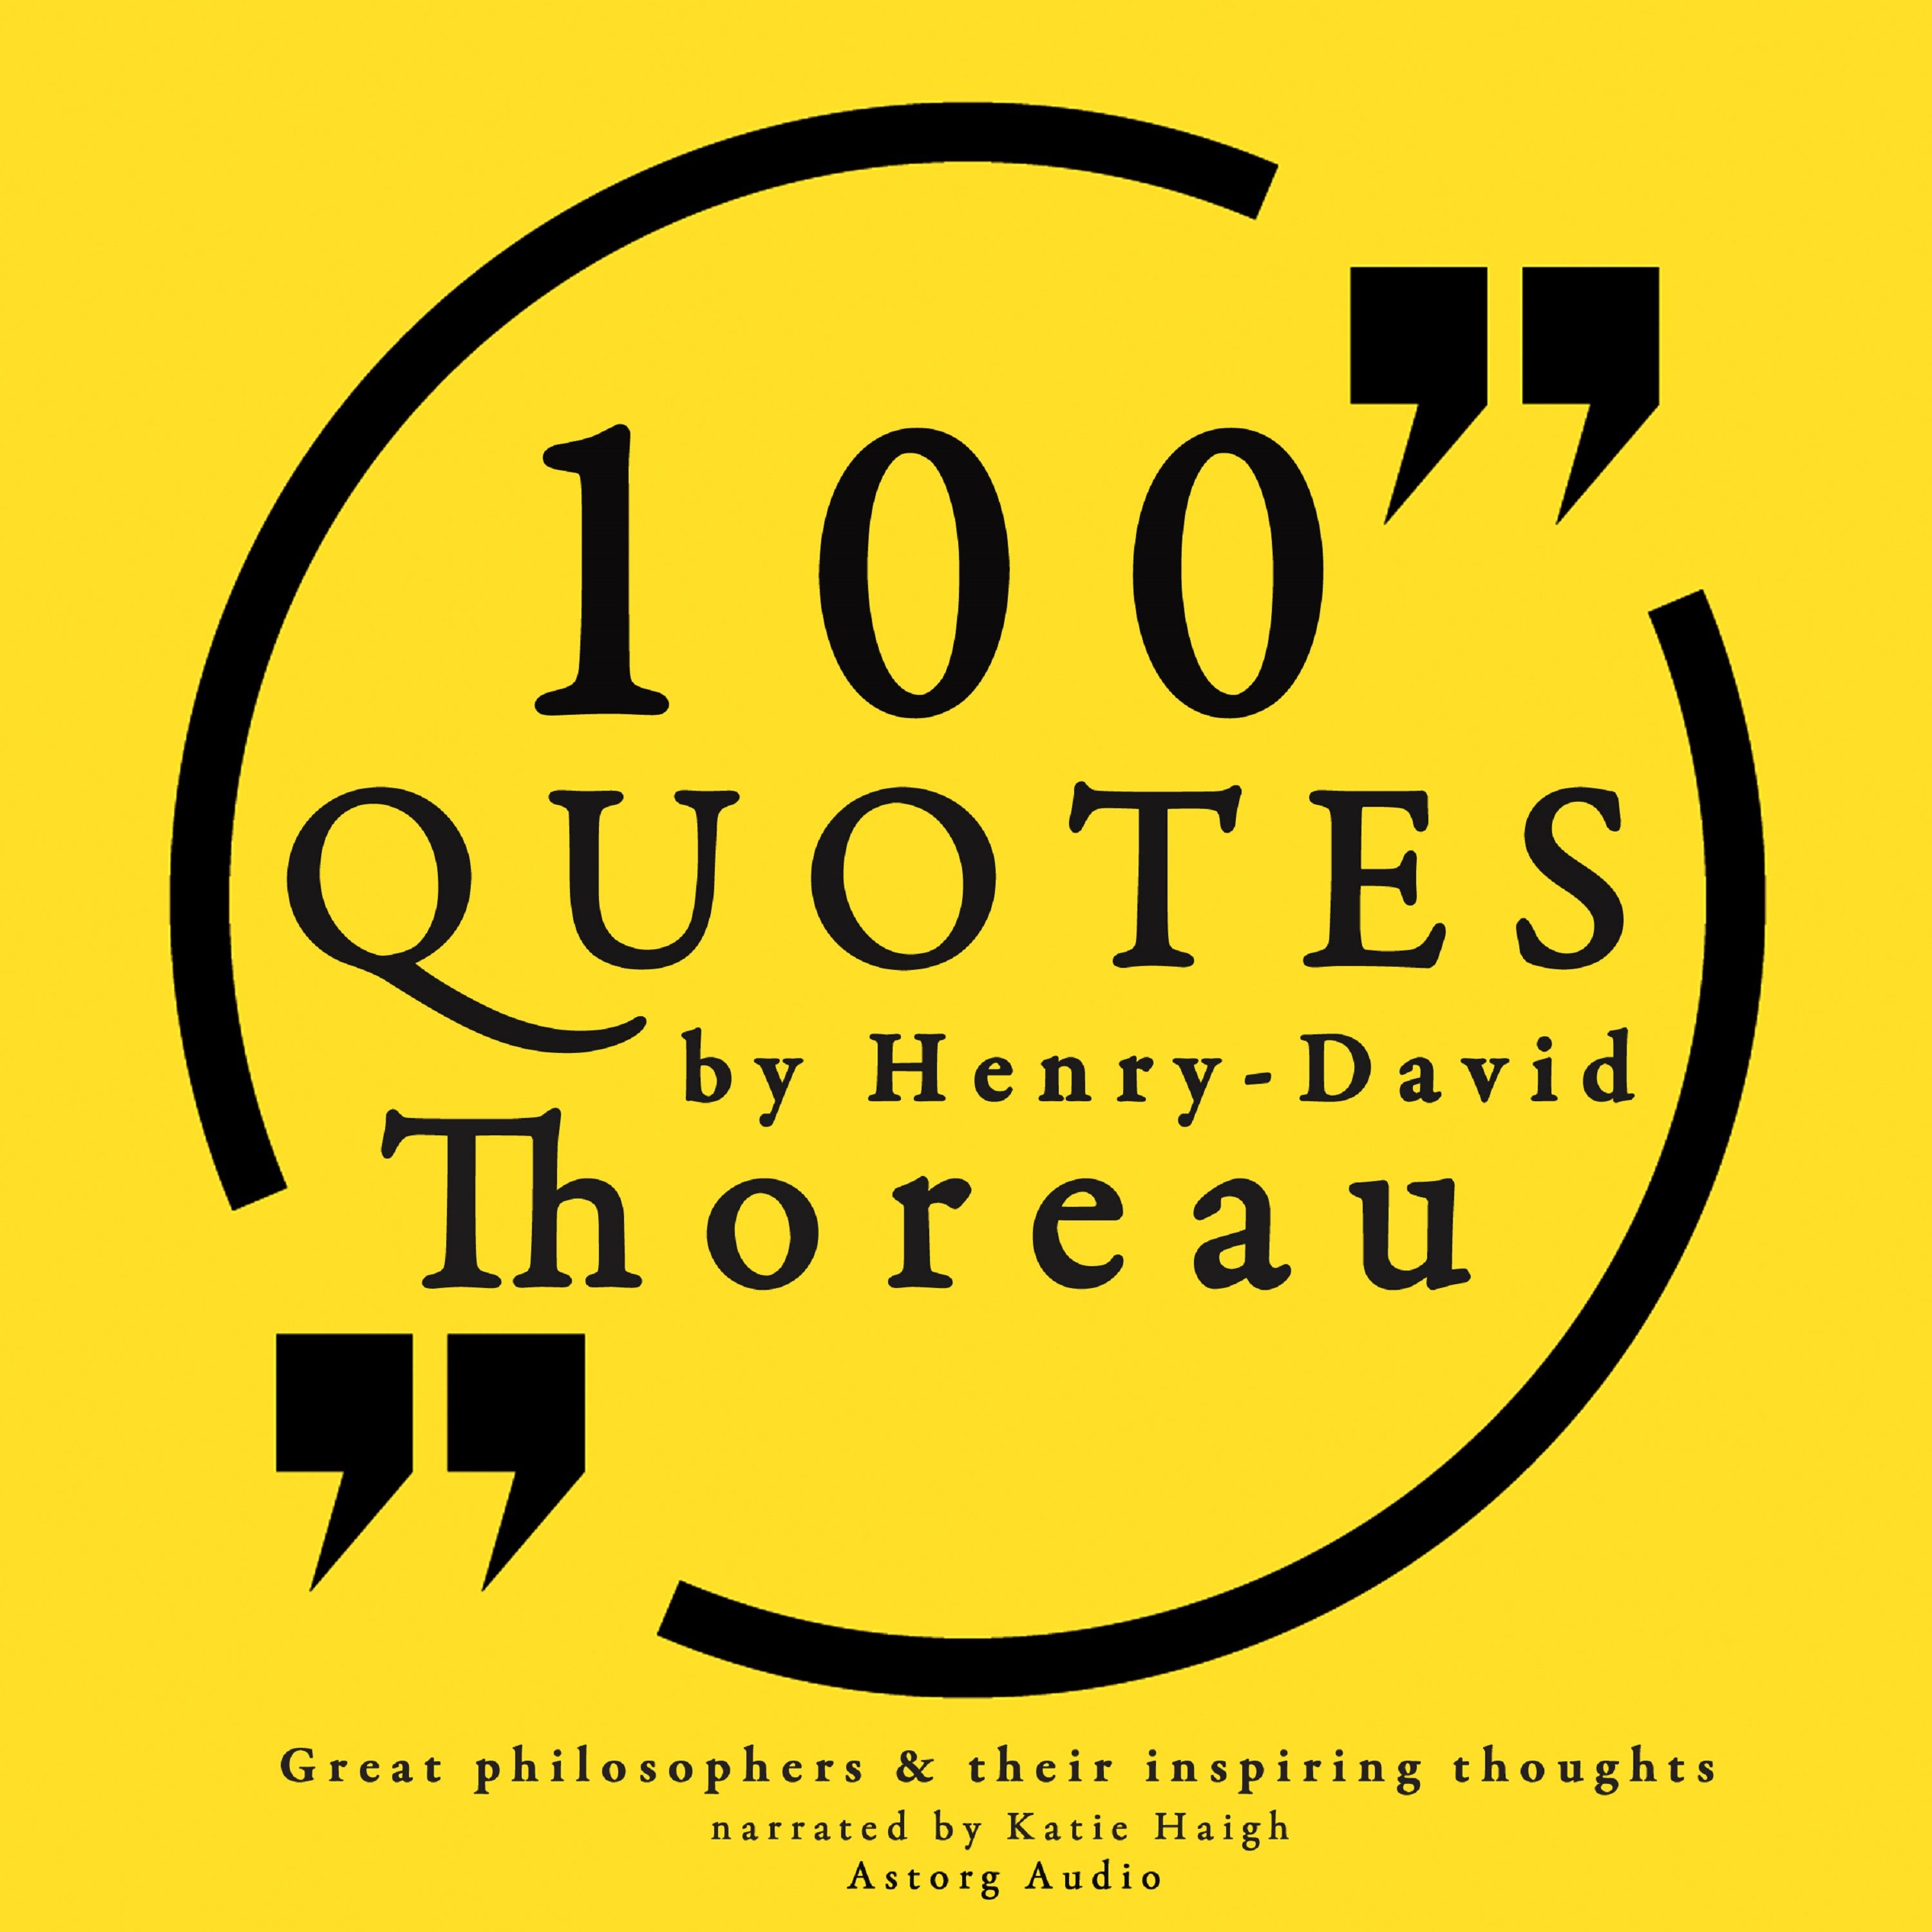 100 Quotes by Henry David Thoreau: Great Philosophers & Their Inspiring Thoughts, audiobook by Henry David Thoreau